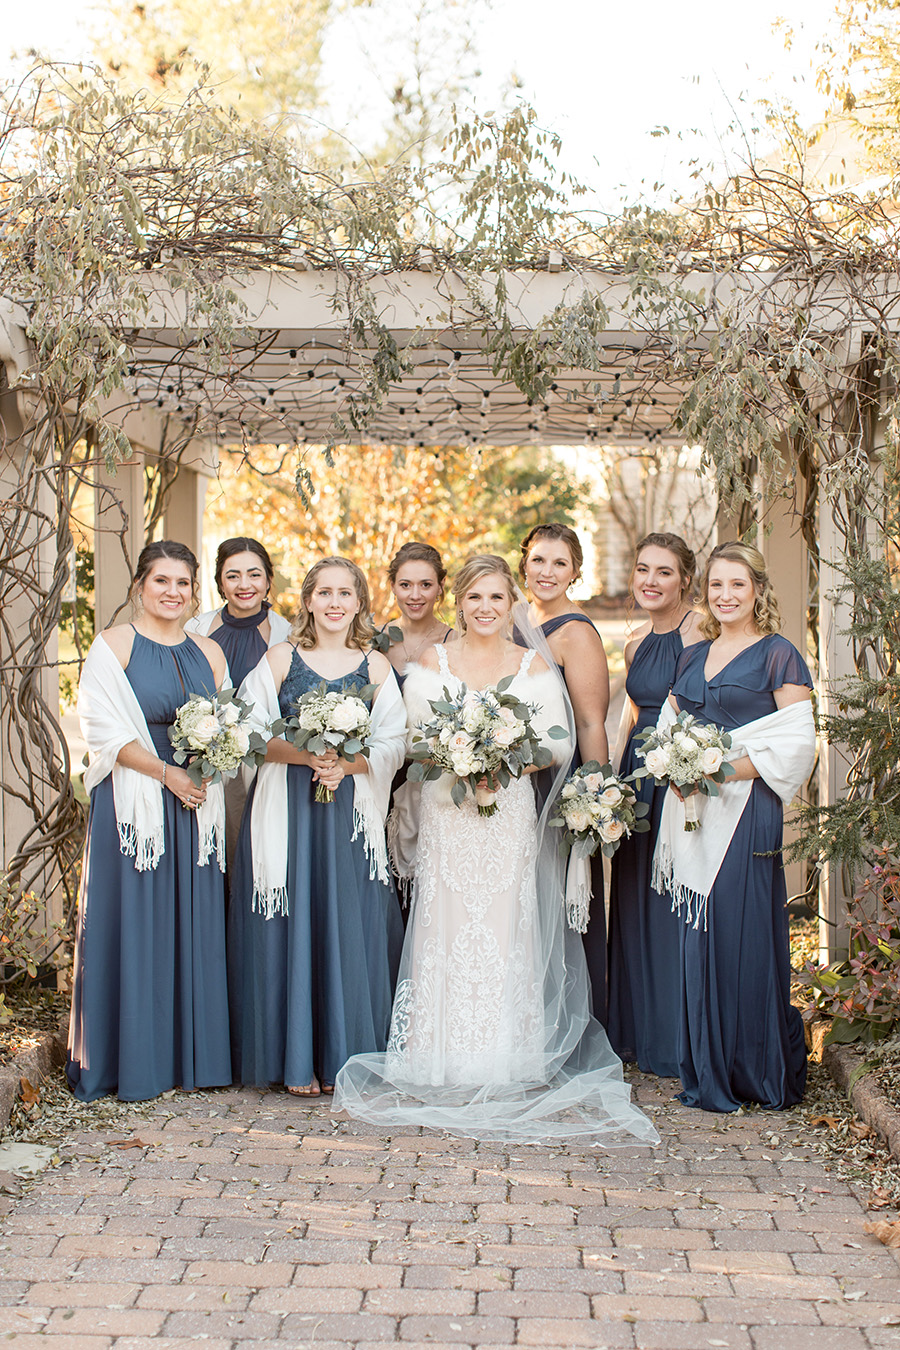 Bride and her bridesmaids in long winter blue dresses and shawls